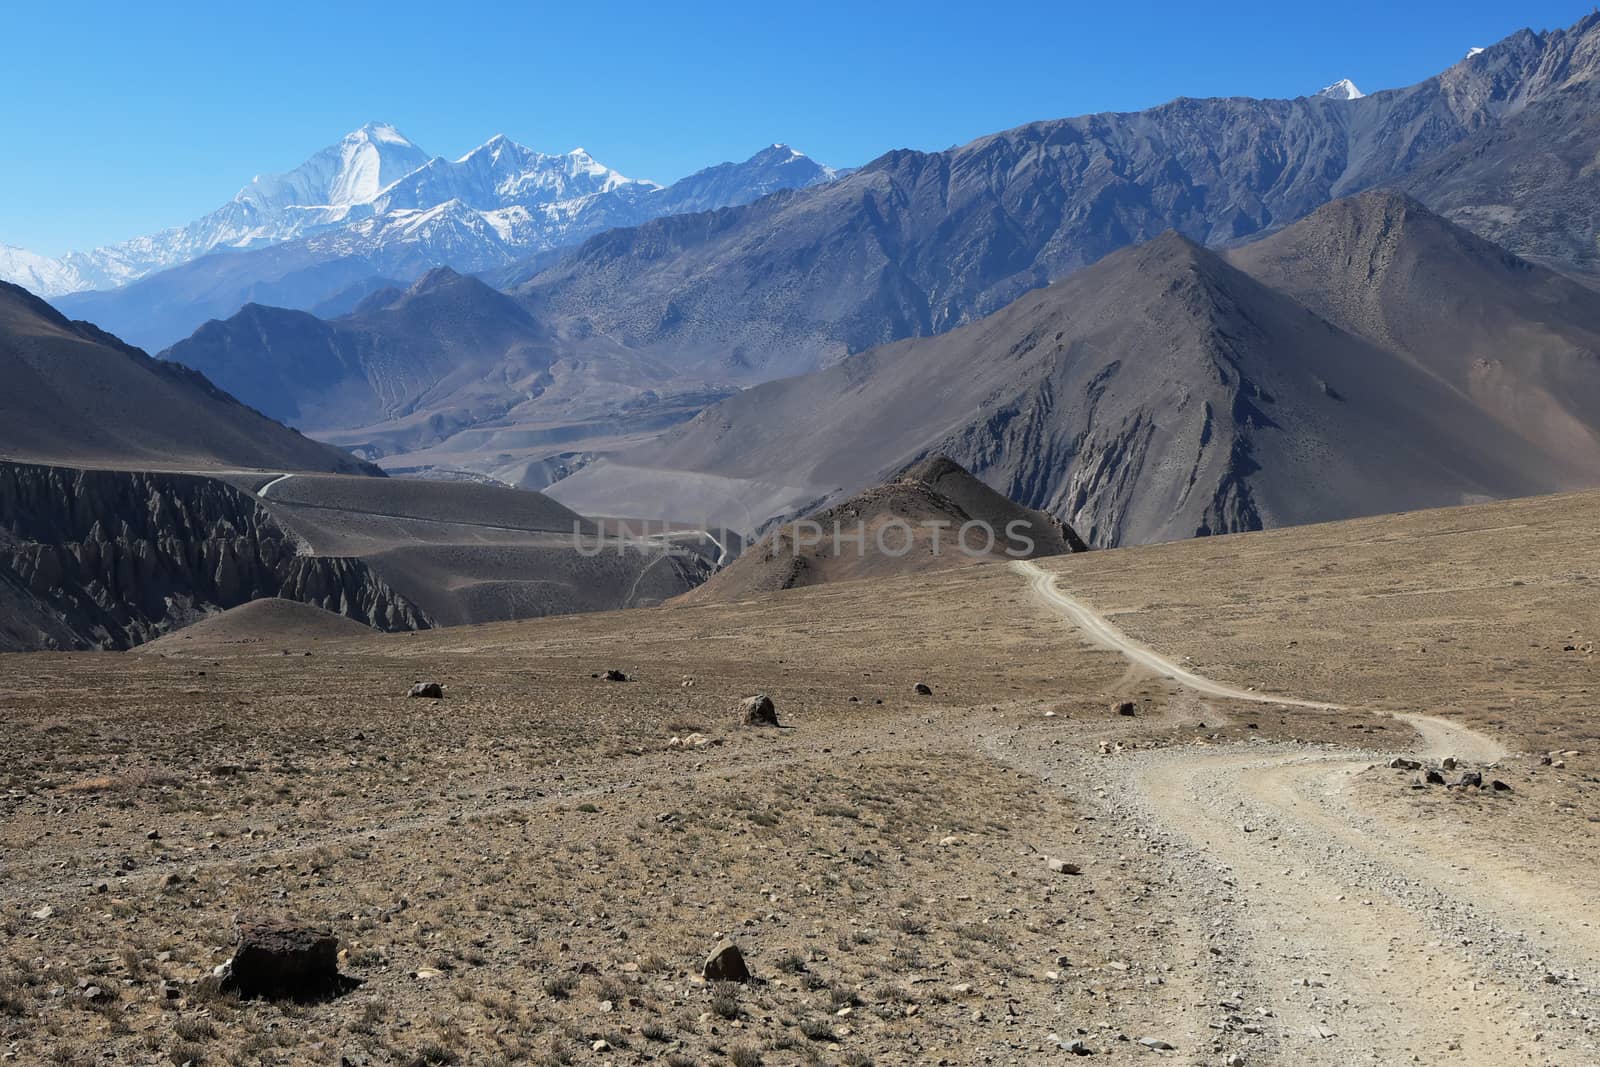 Mountain road in the Himalayas at an altitude of 4,500 meters with a mountain nilgiri in the background.